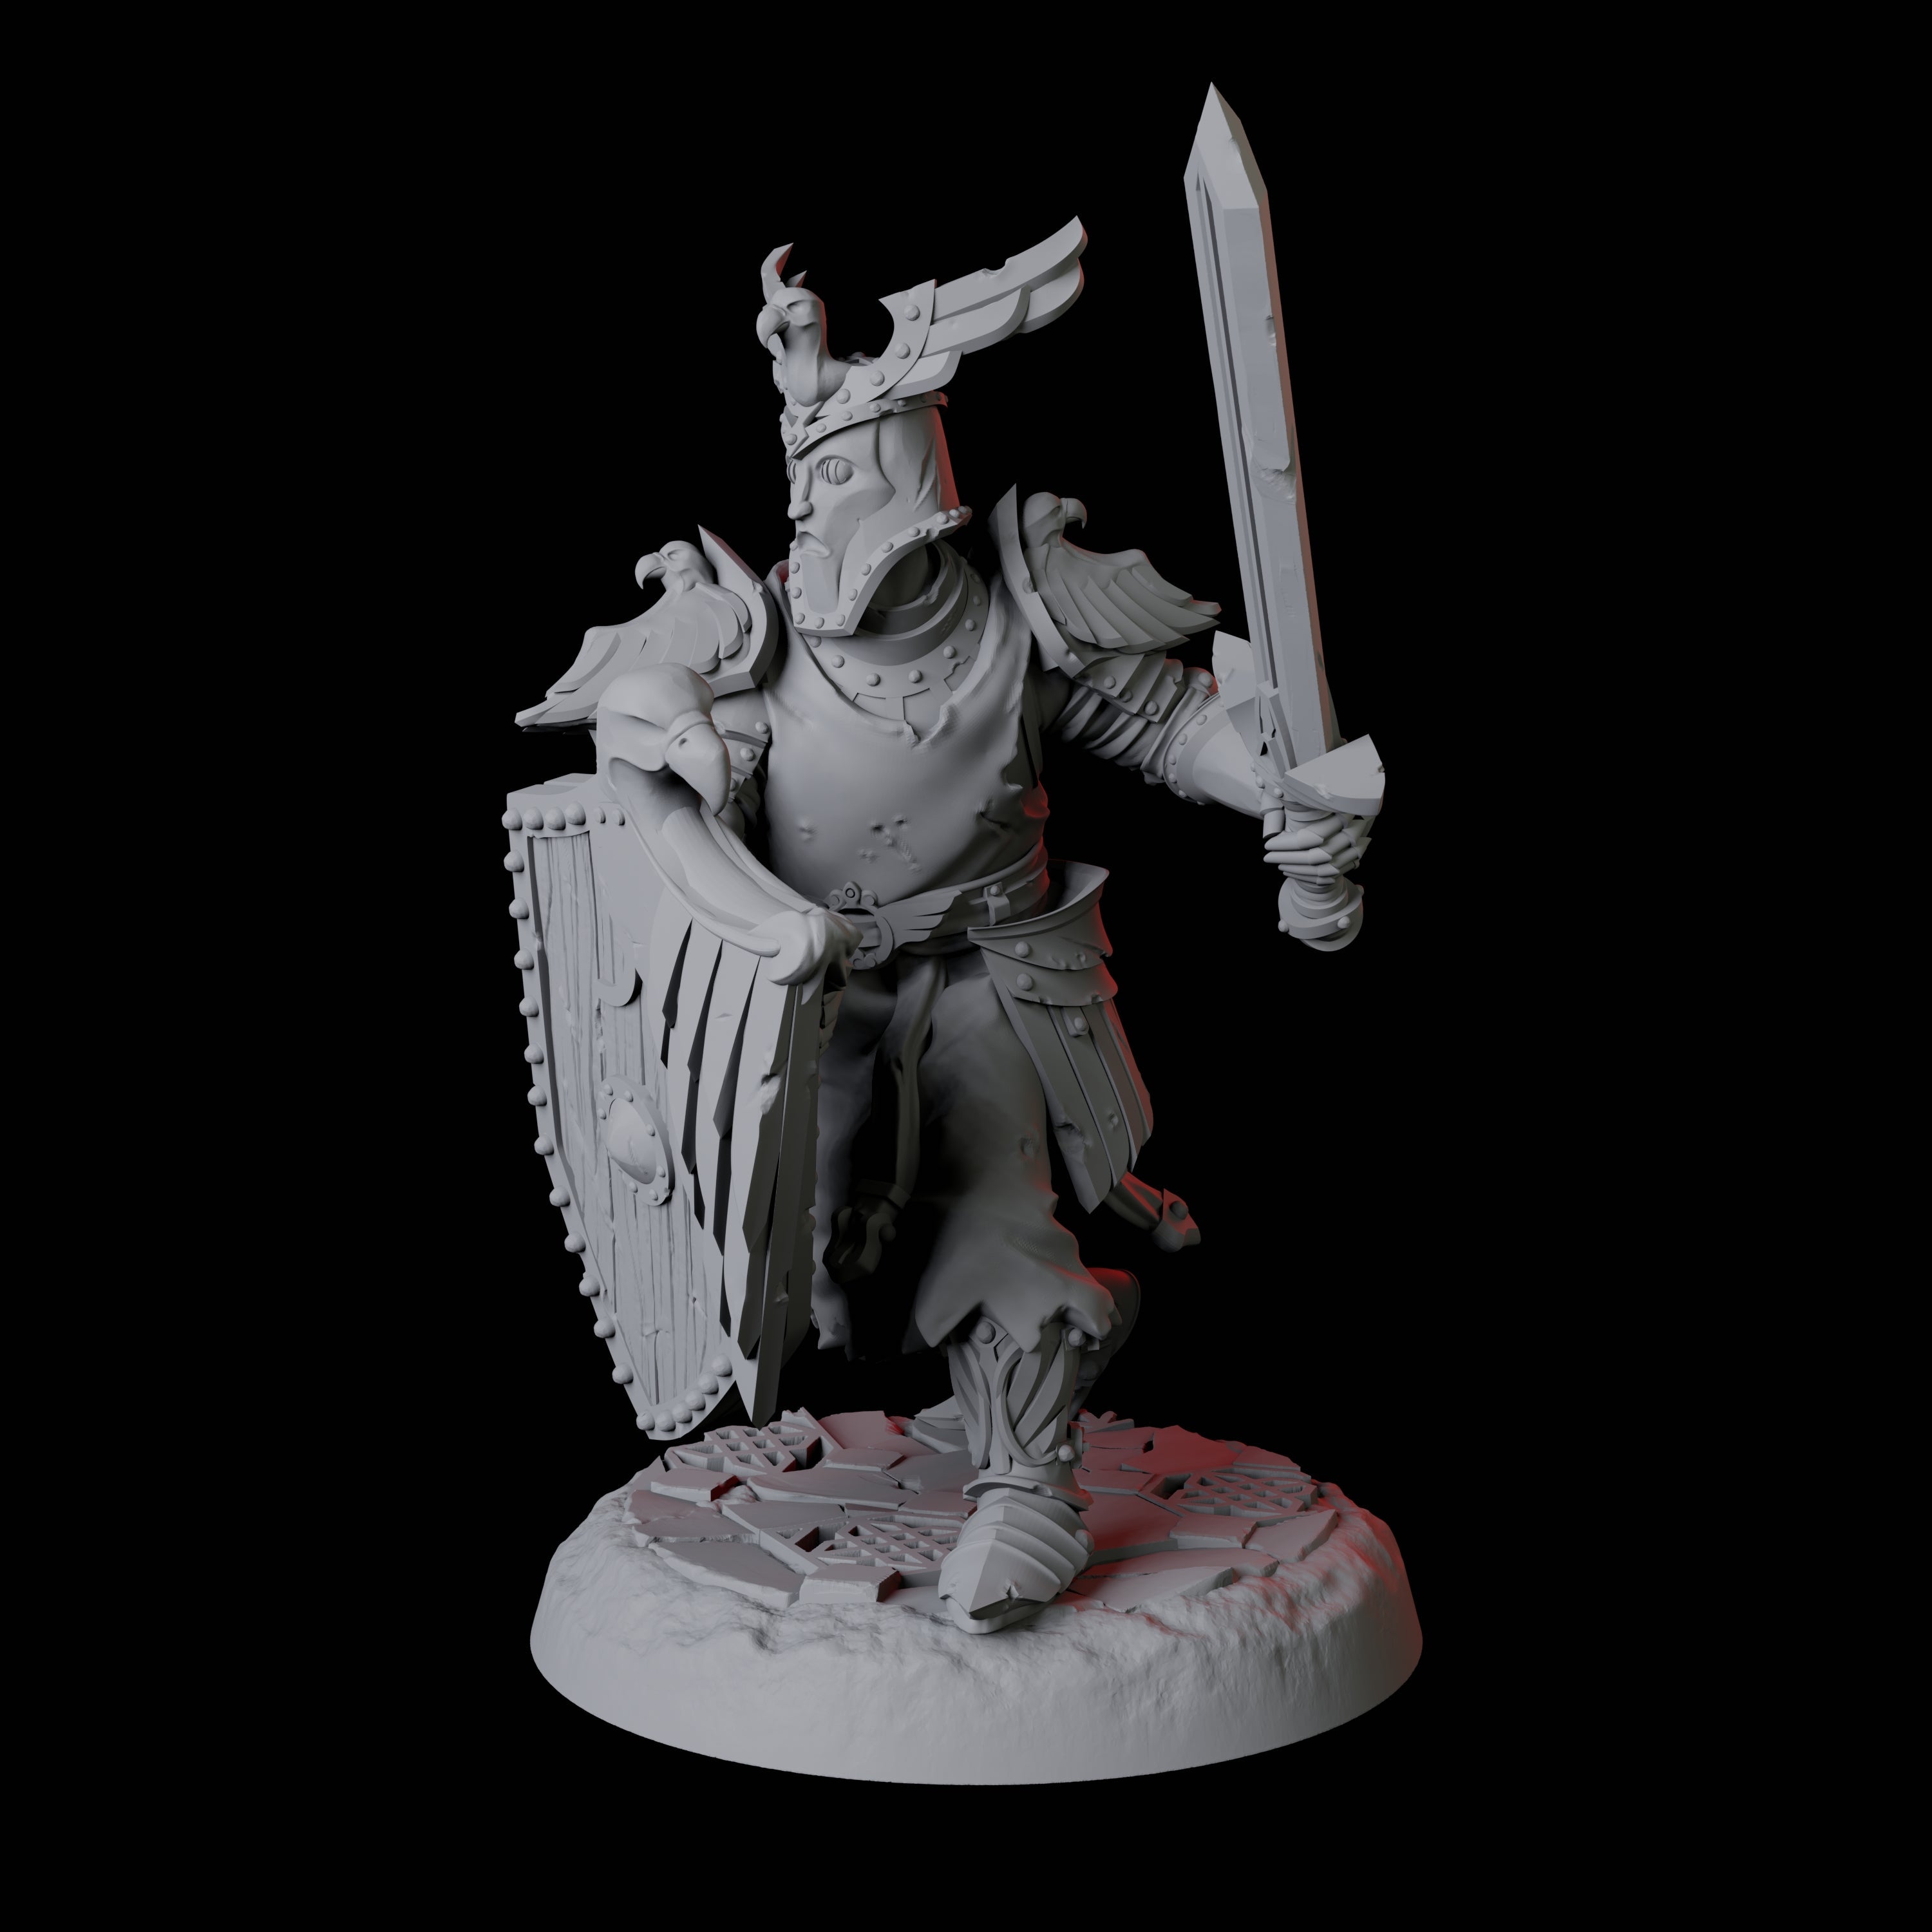 Holy Inquisitor Paladin Miniature for Dungeons and Dragons, Pathfinder or other TTRPGs